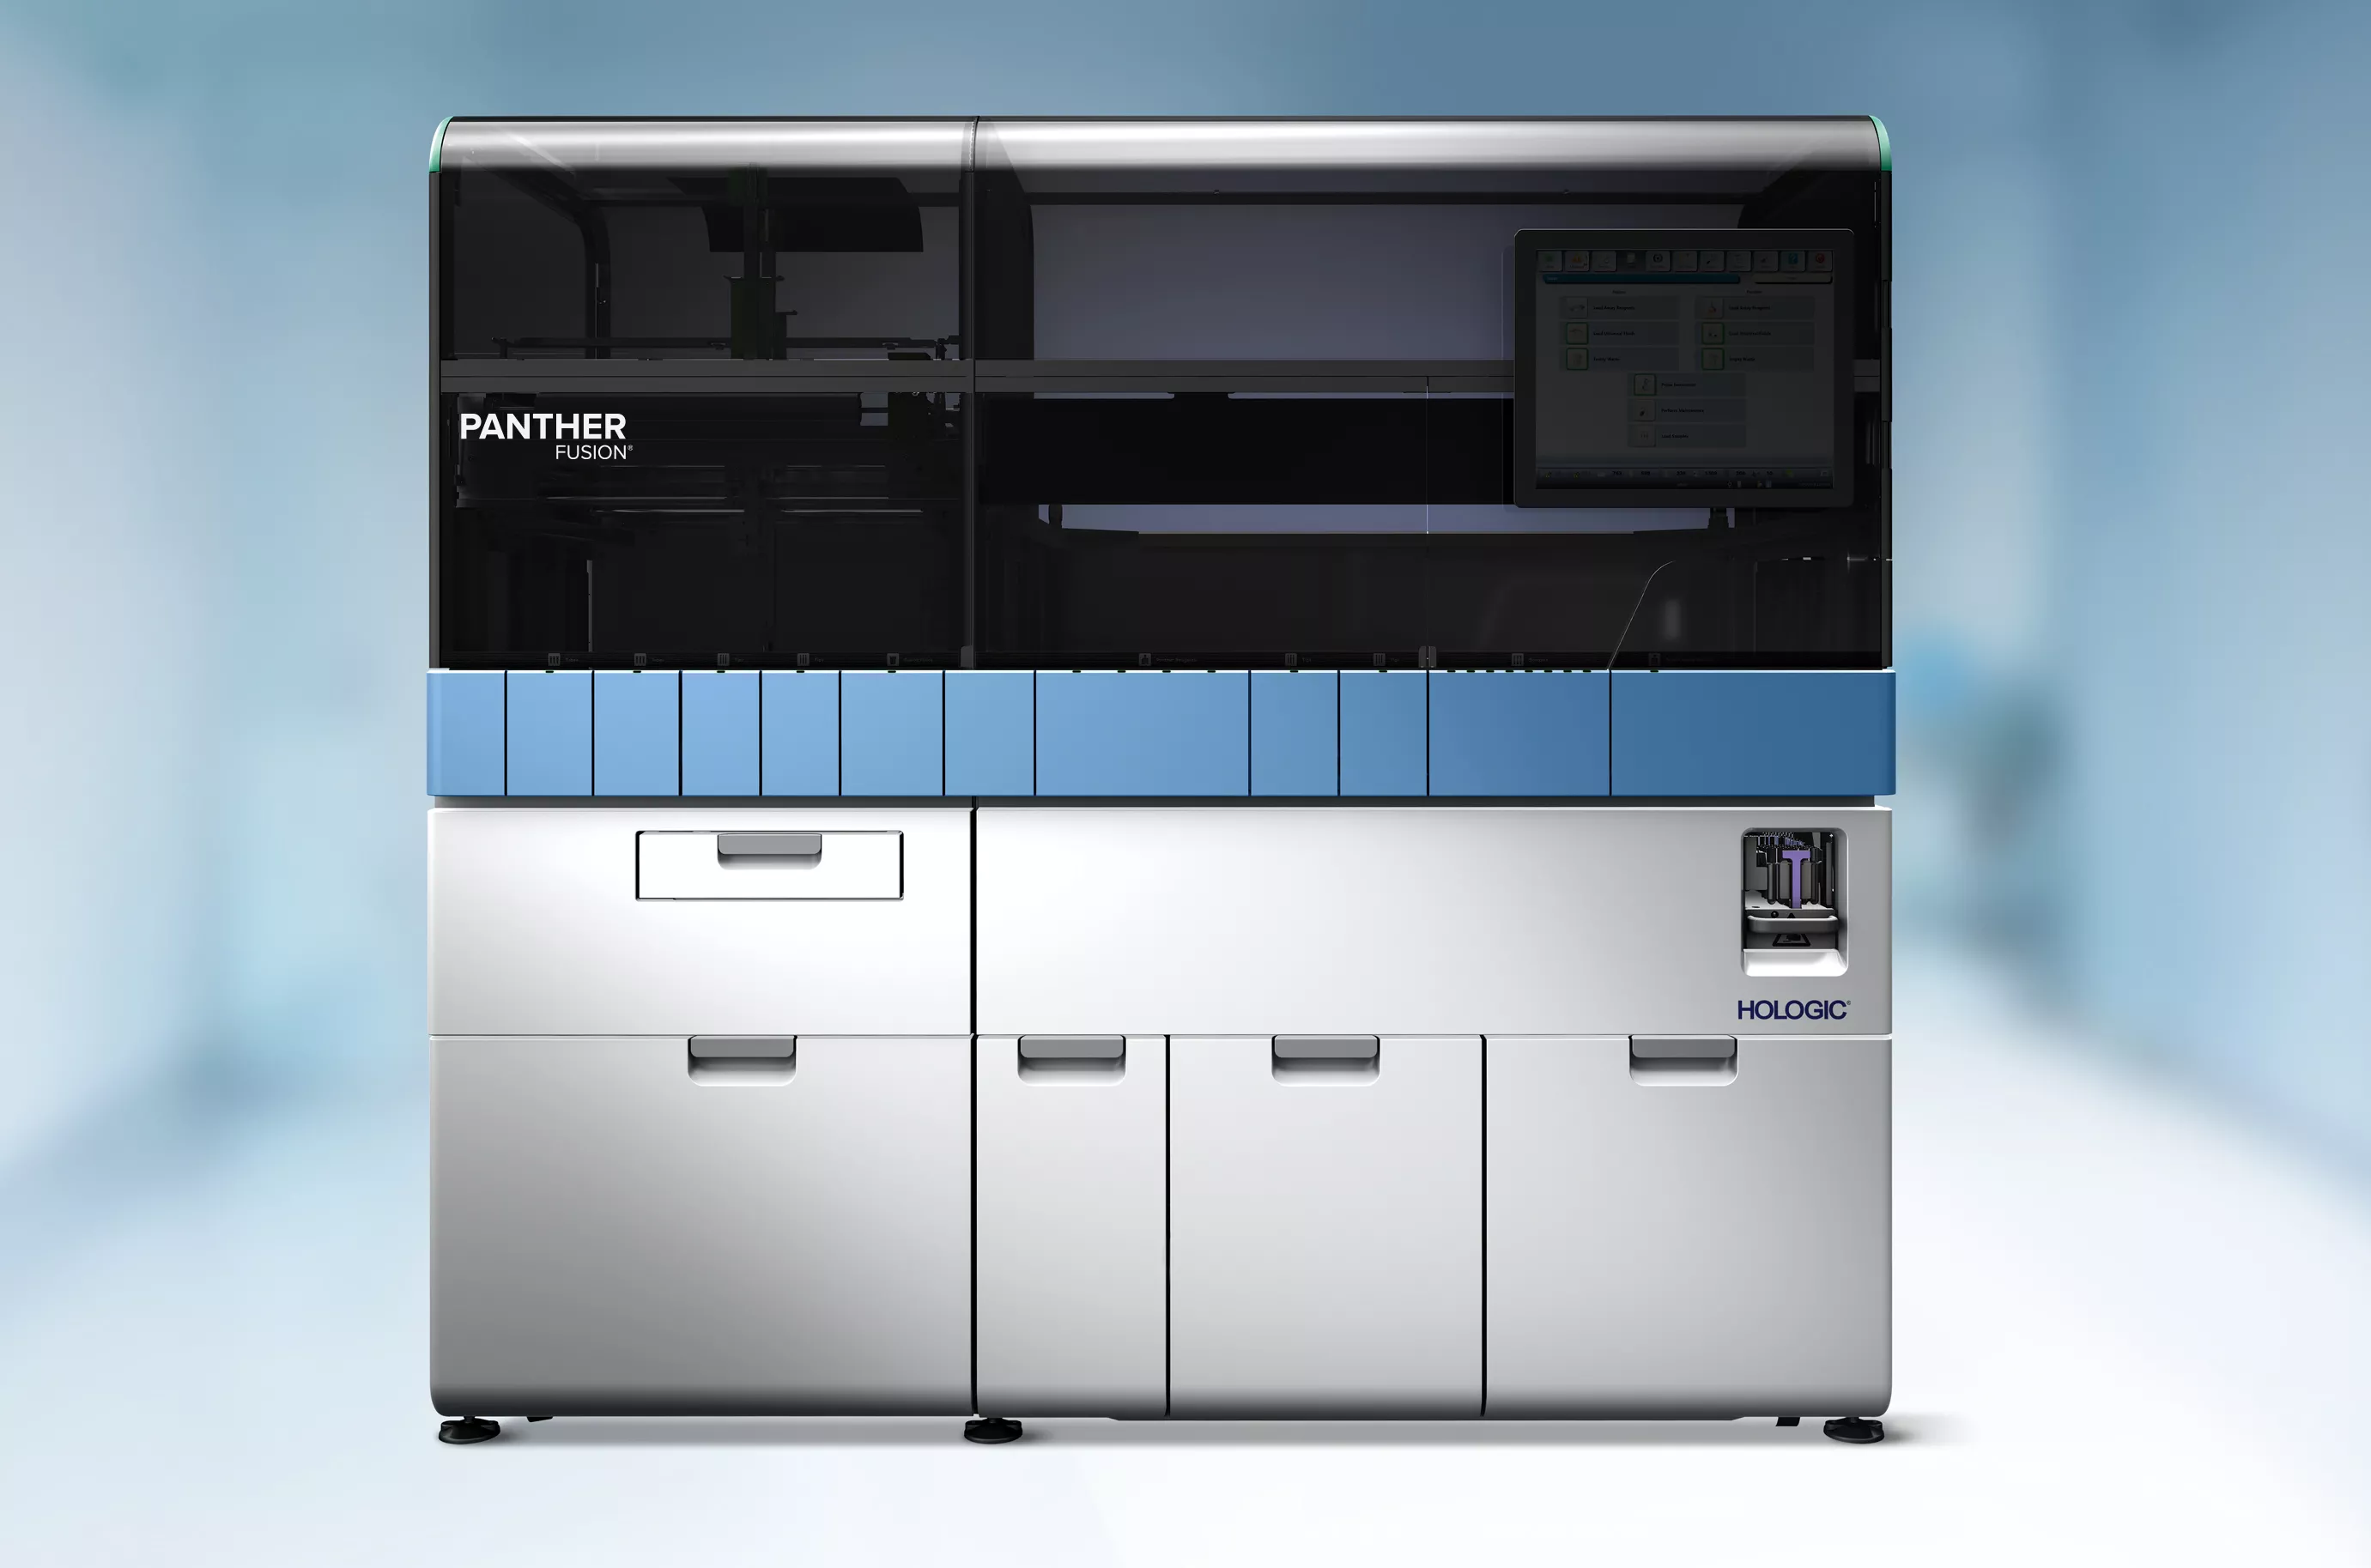 Image of Panther Fusion in lab setting.